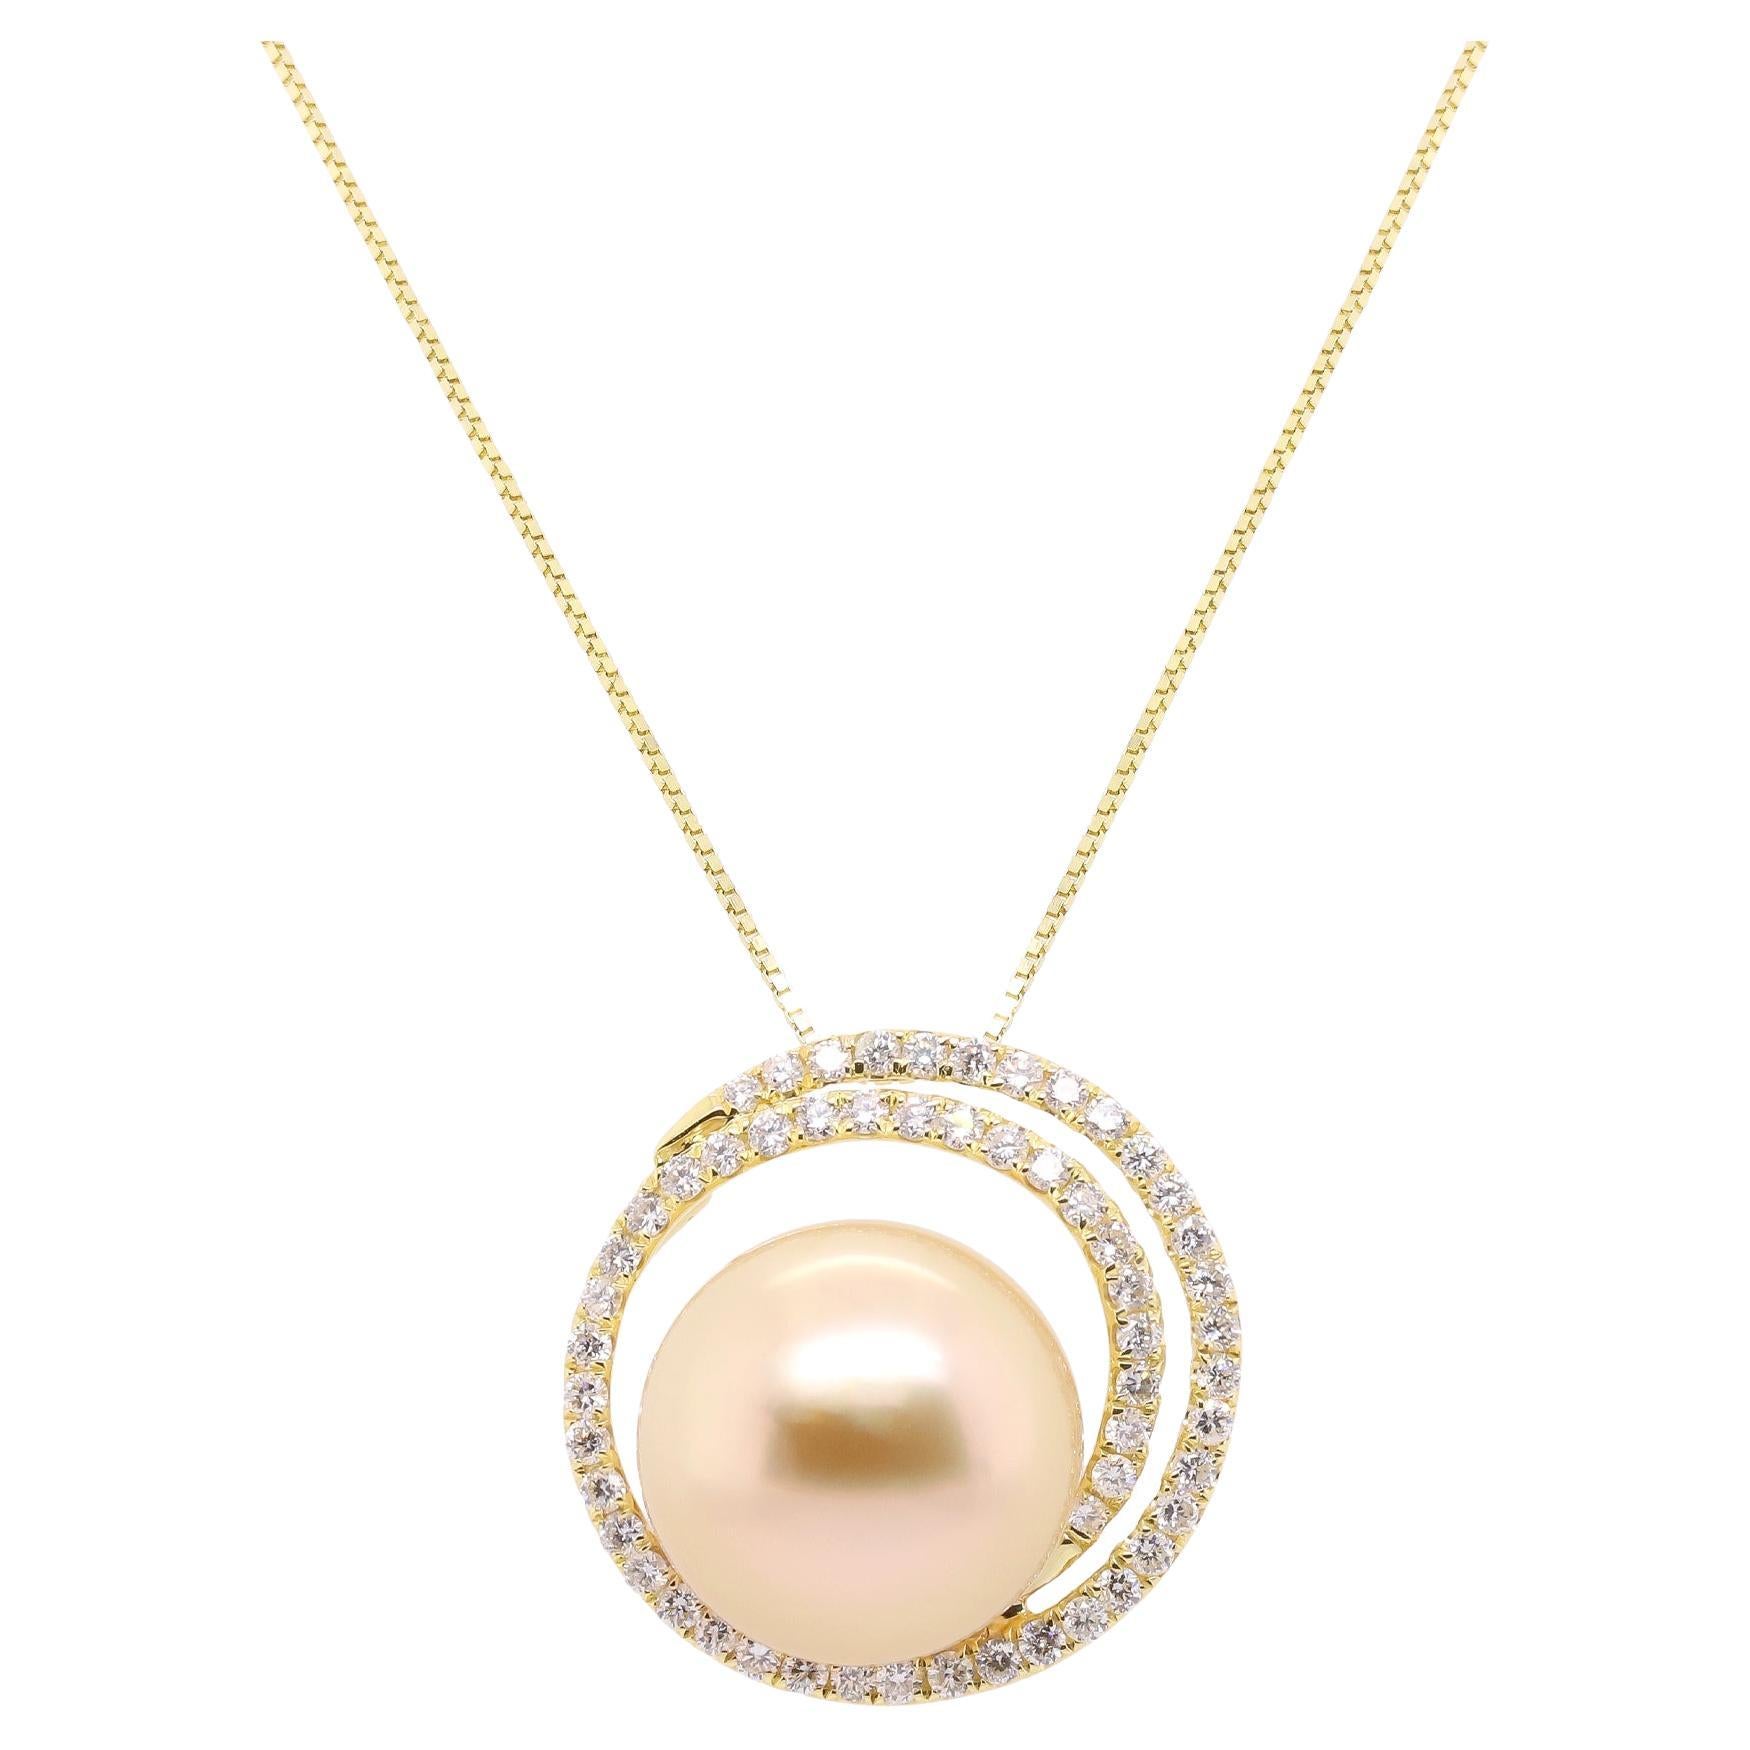 13.29 Carat South Sea Pearl with Diamond accents 18K Yellow Gold Pendant For Sale